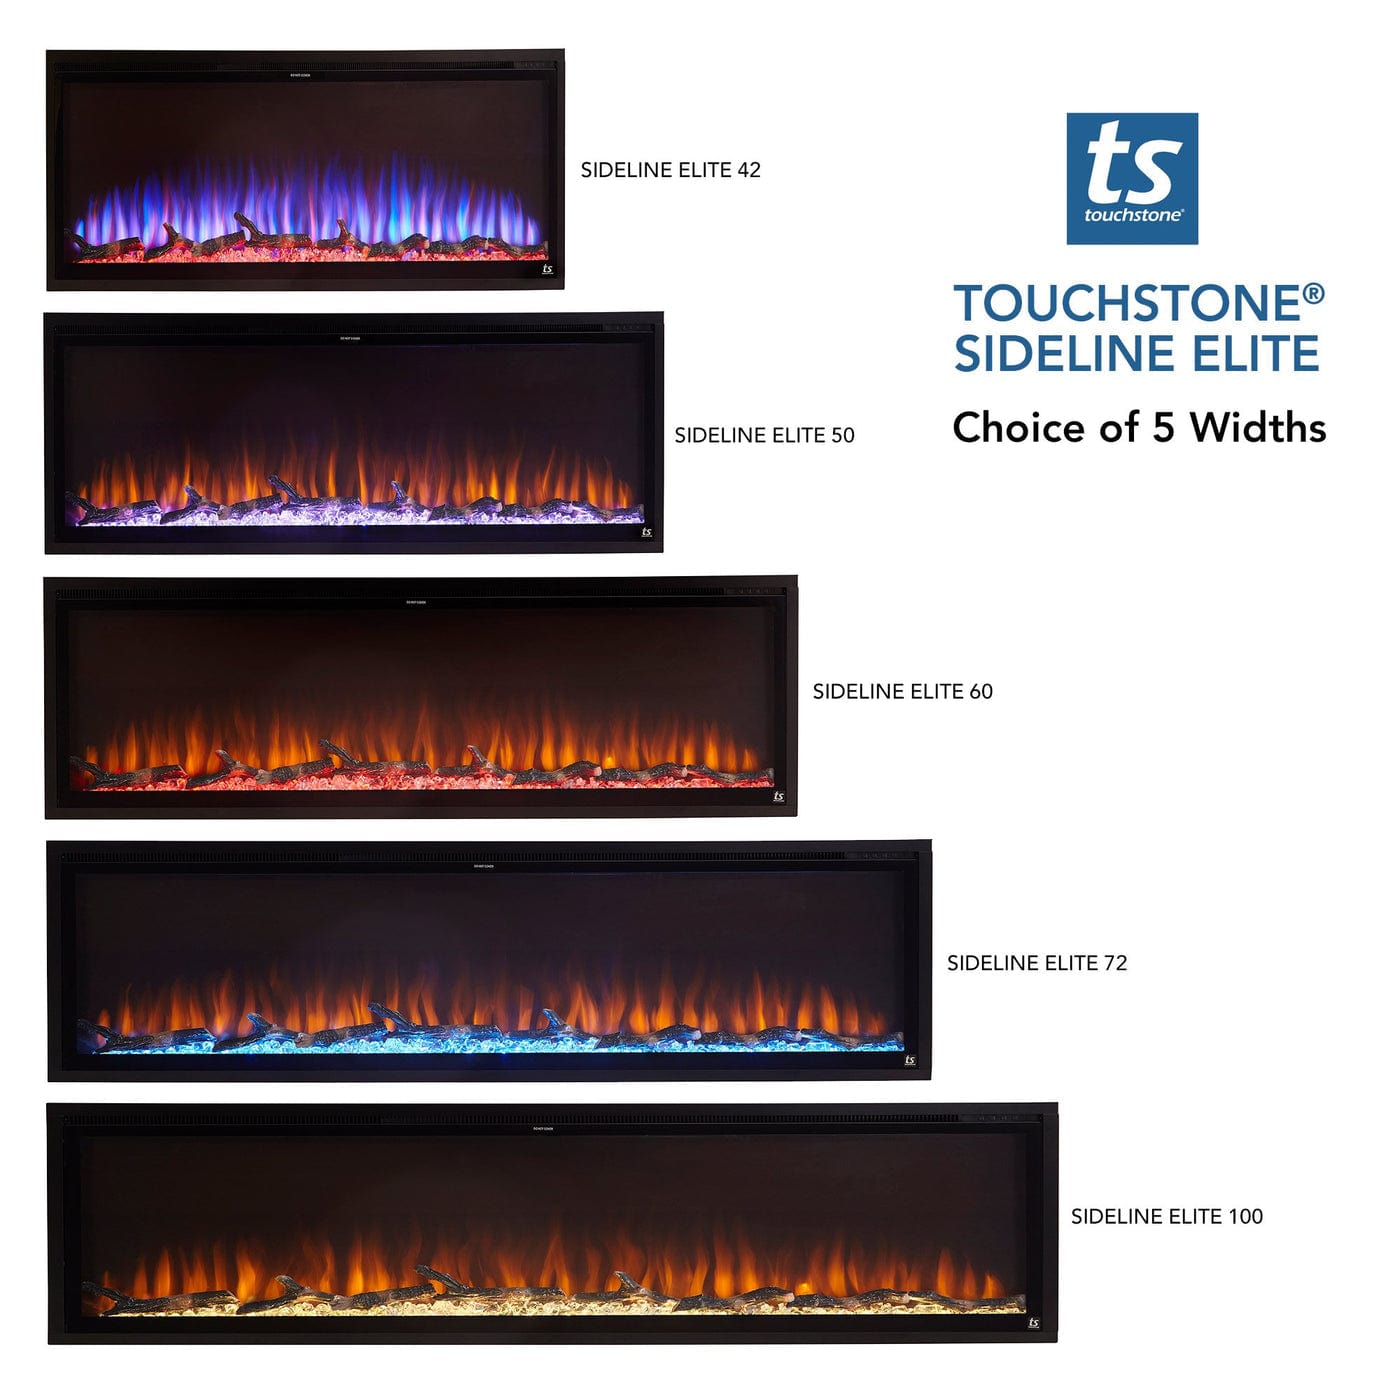 Sideline Elite Smart 50" WiFi-Enabled Recessed Electric Fireplace (Alexa/Google Compatible) Touchstone